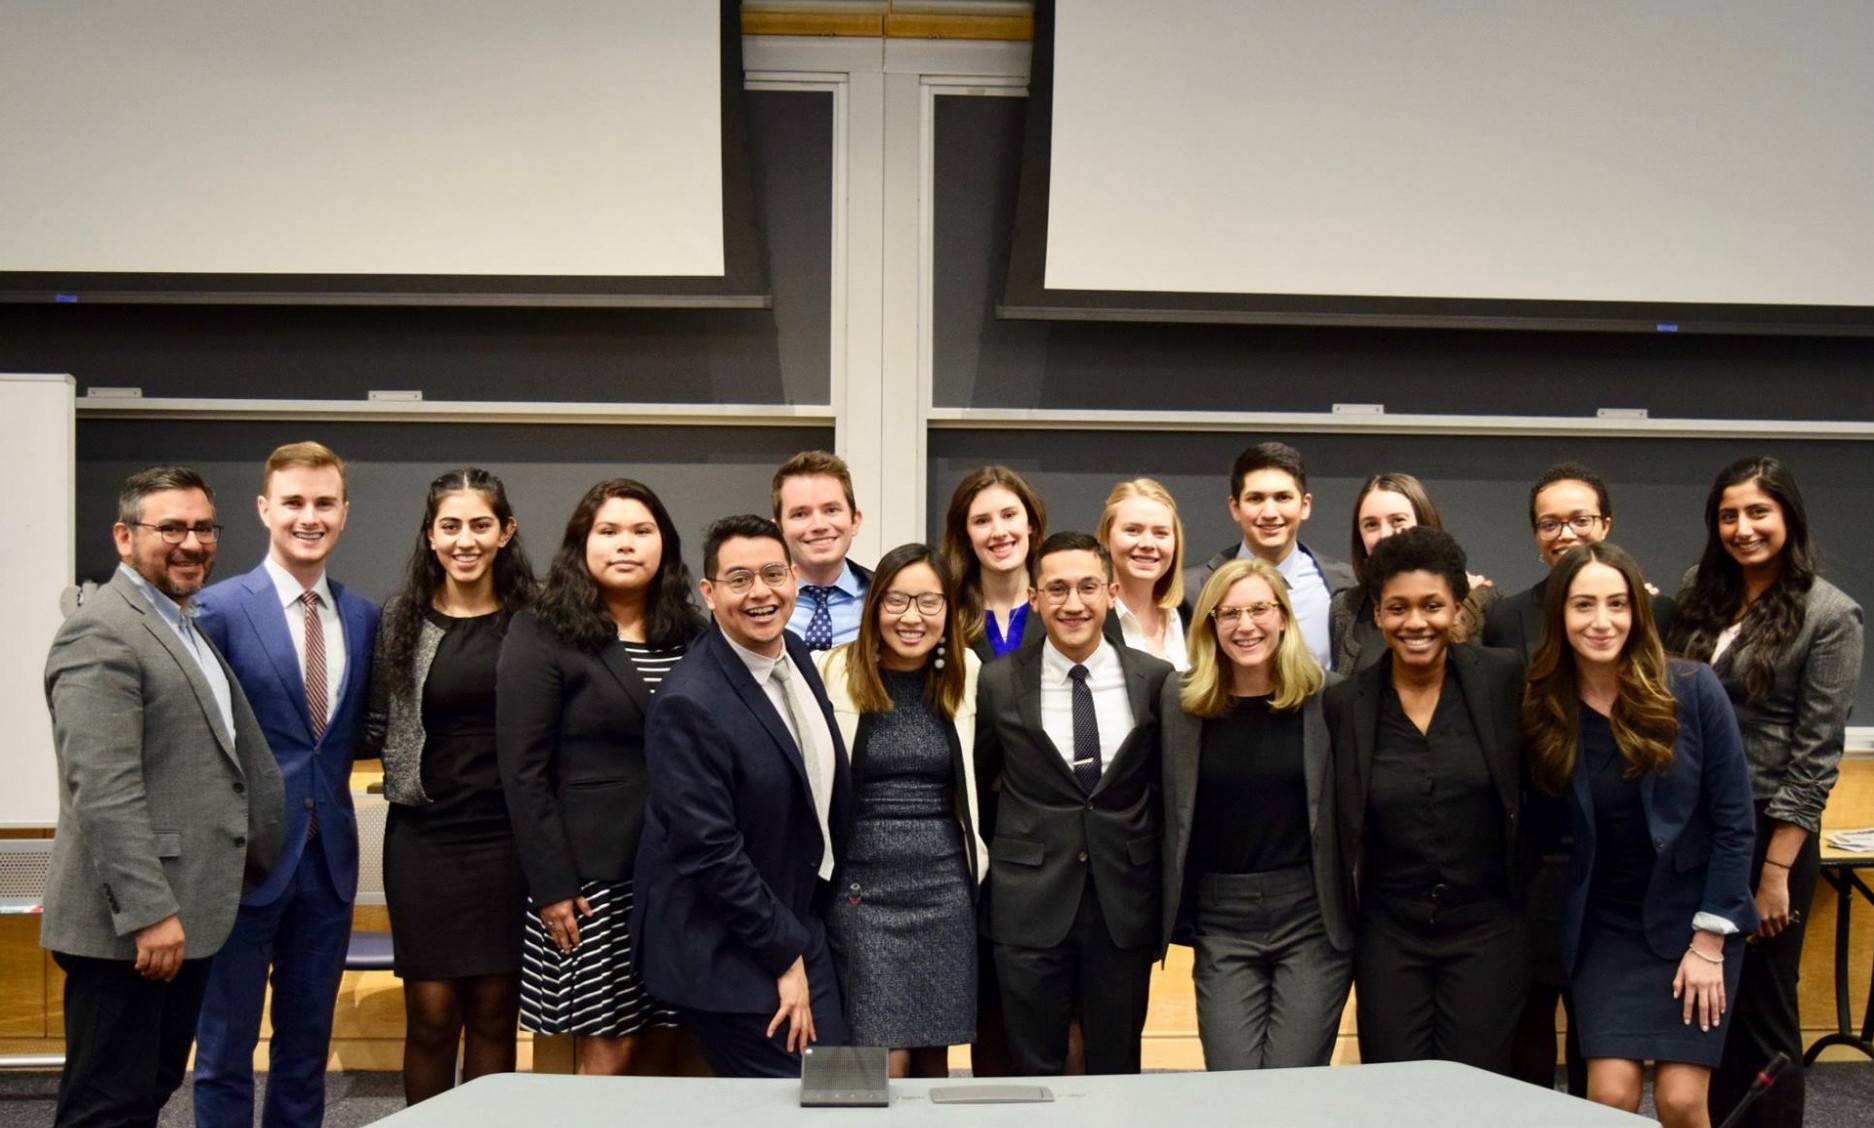 Picture of 15 of our Moot Court Team members and 3 of our judges standing together in a classroom